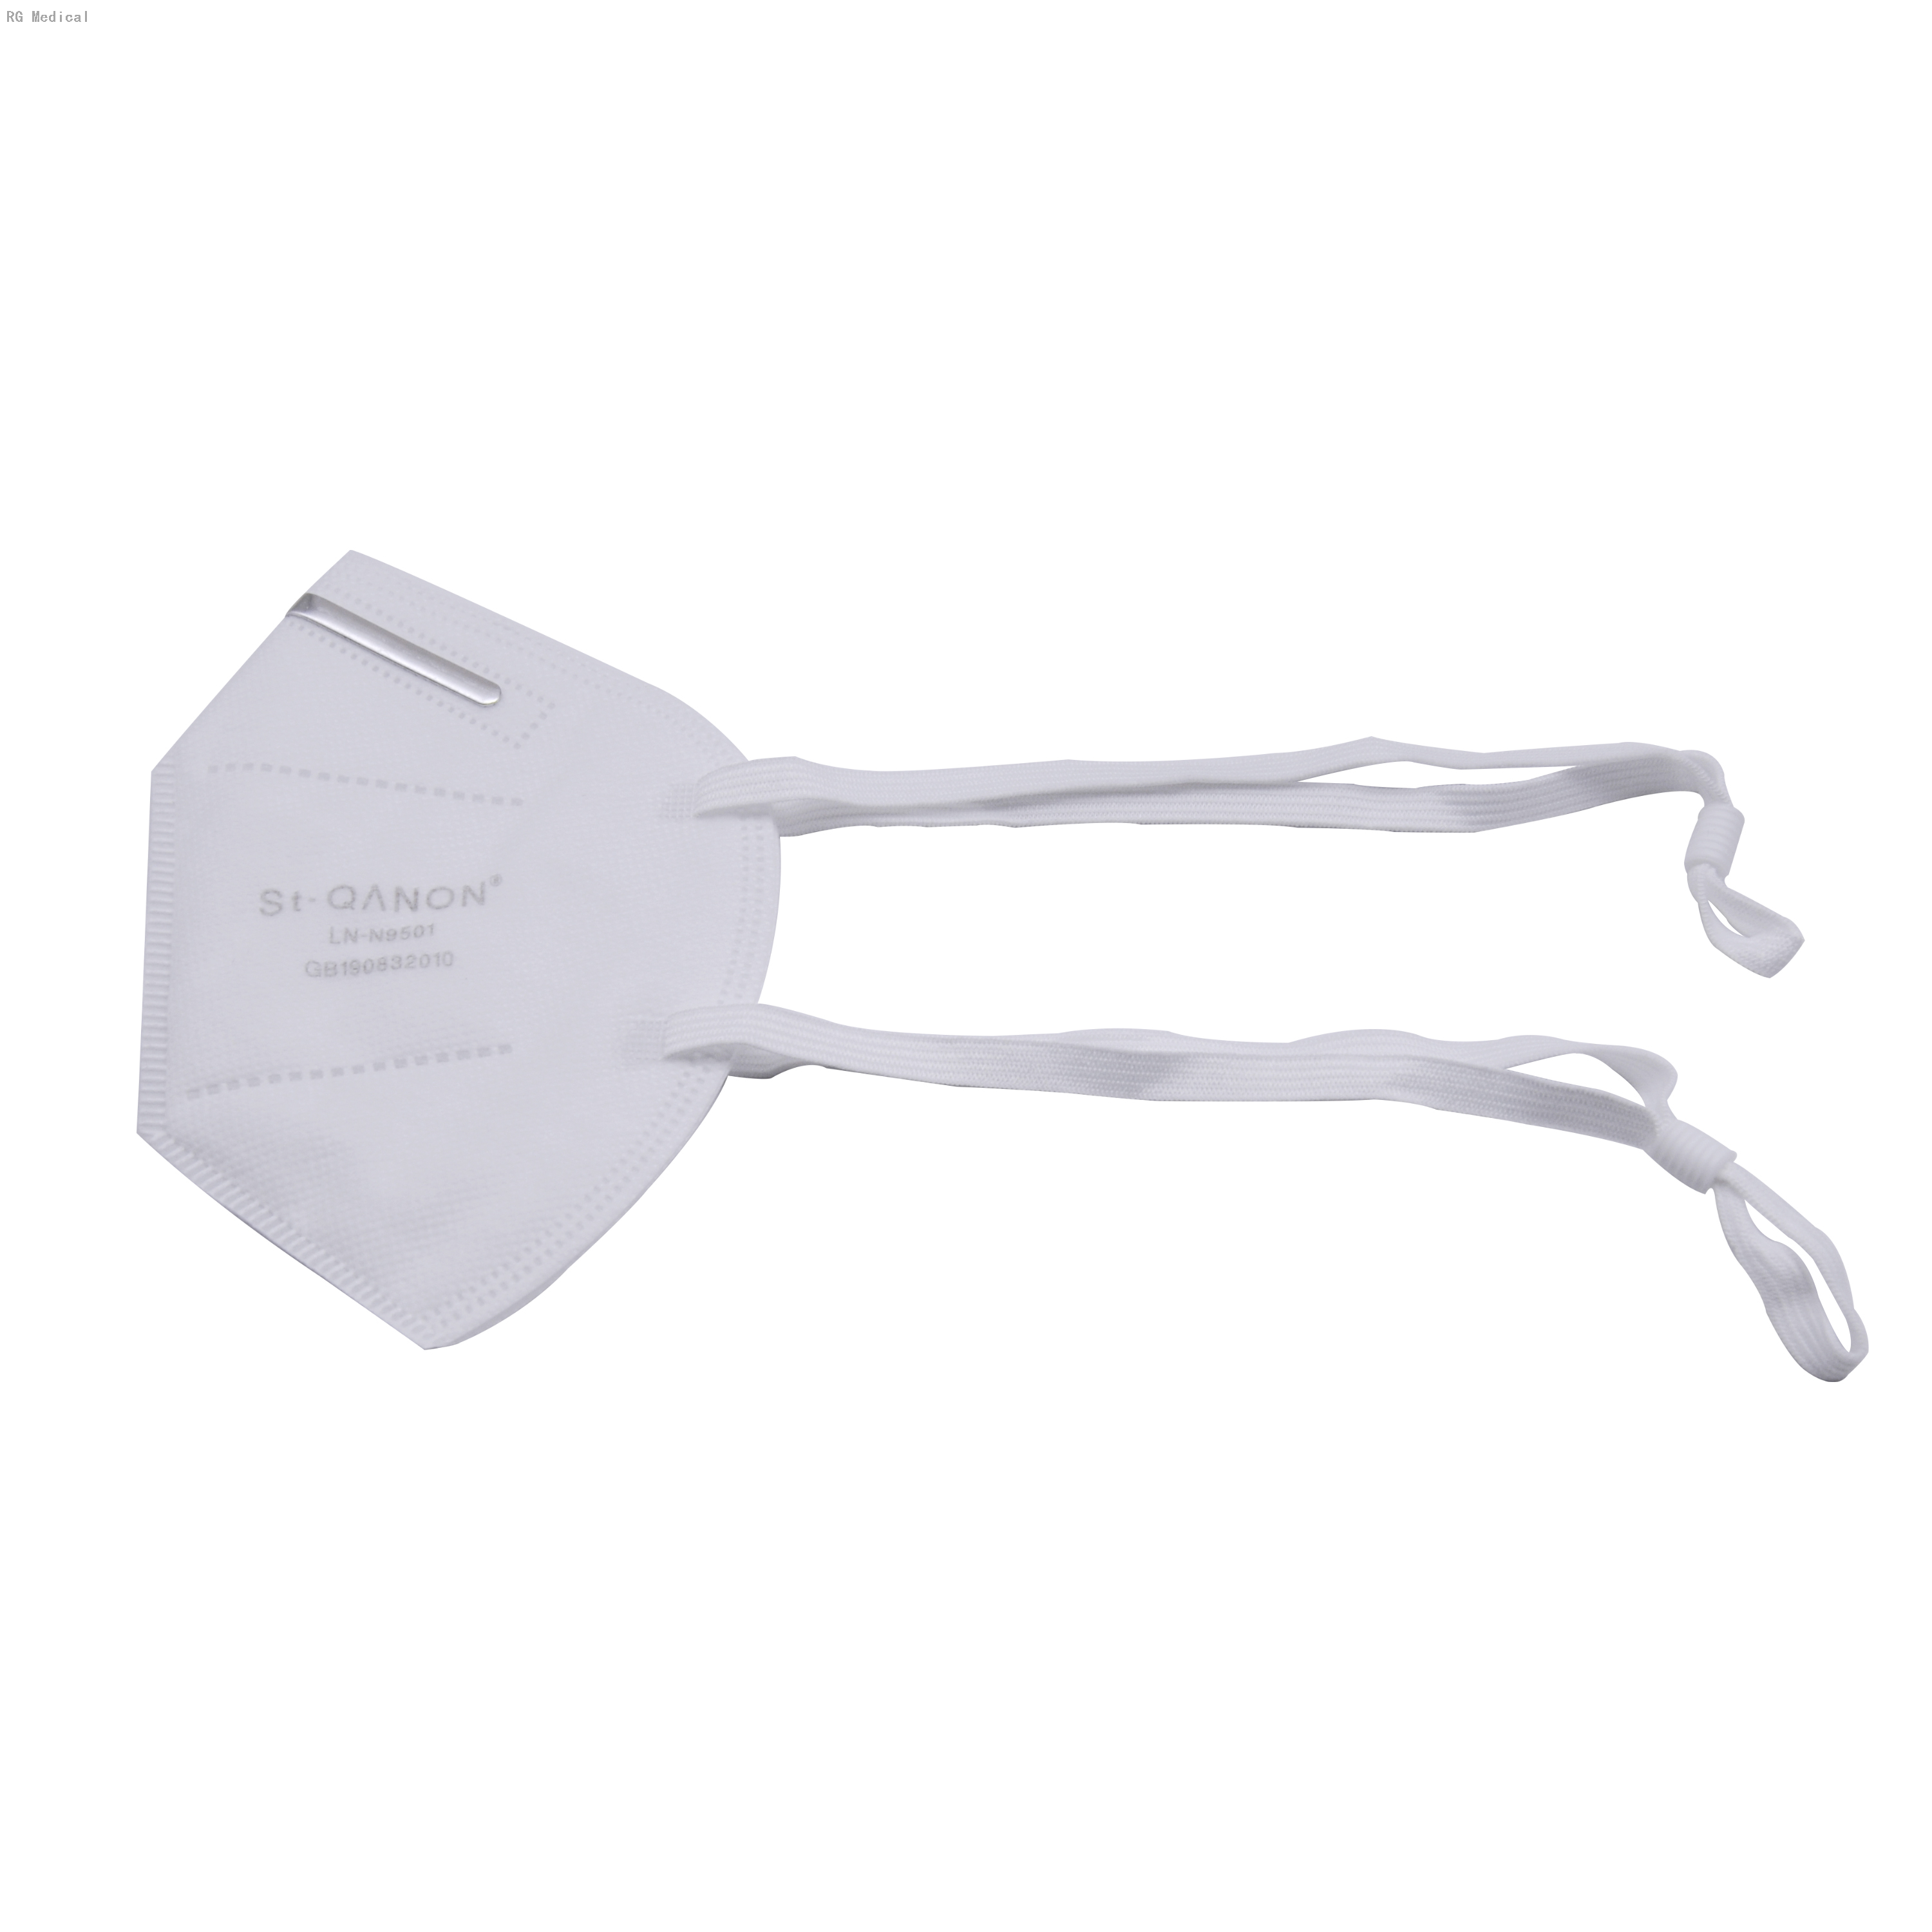 LN-N9501 White Color Fold Type Fabric Medical Mask 